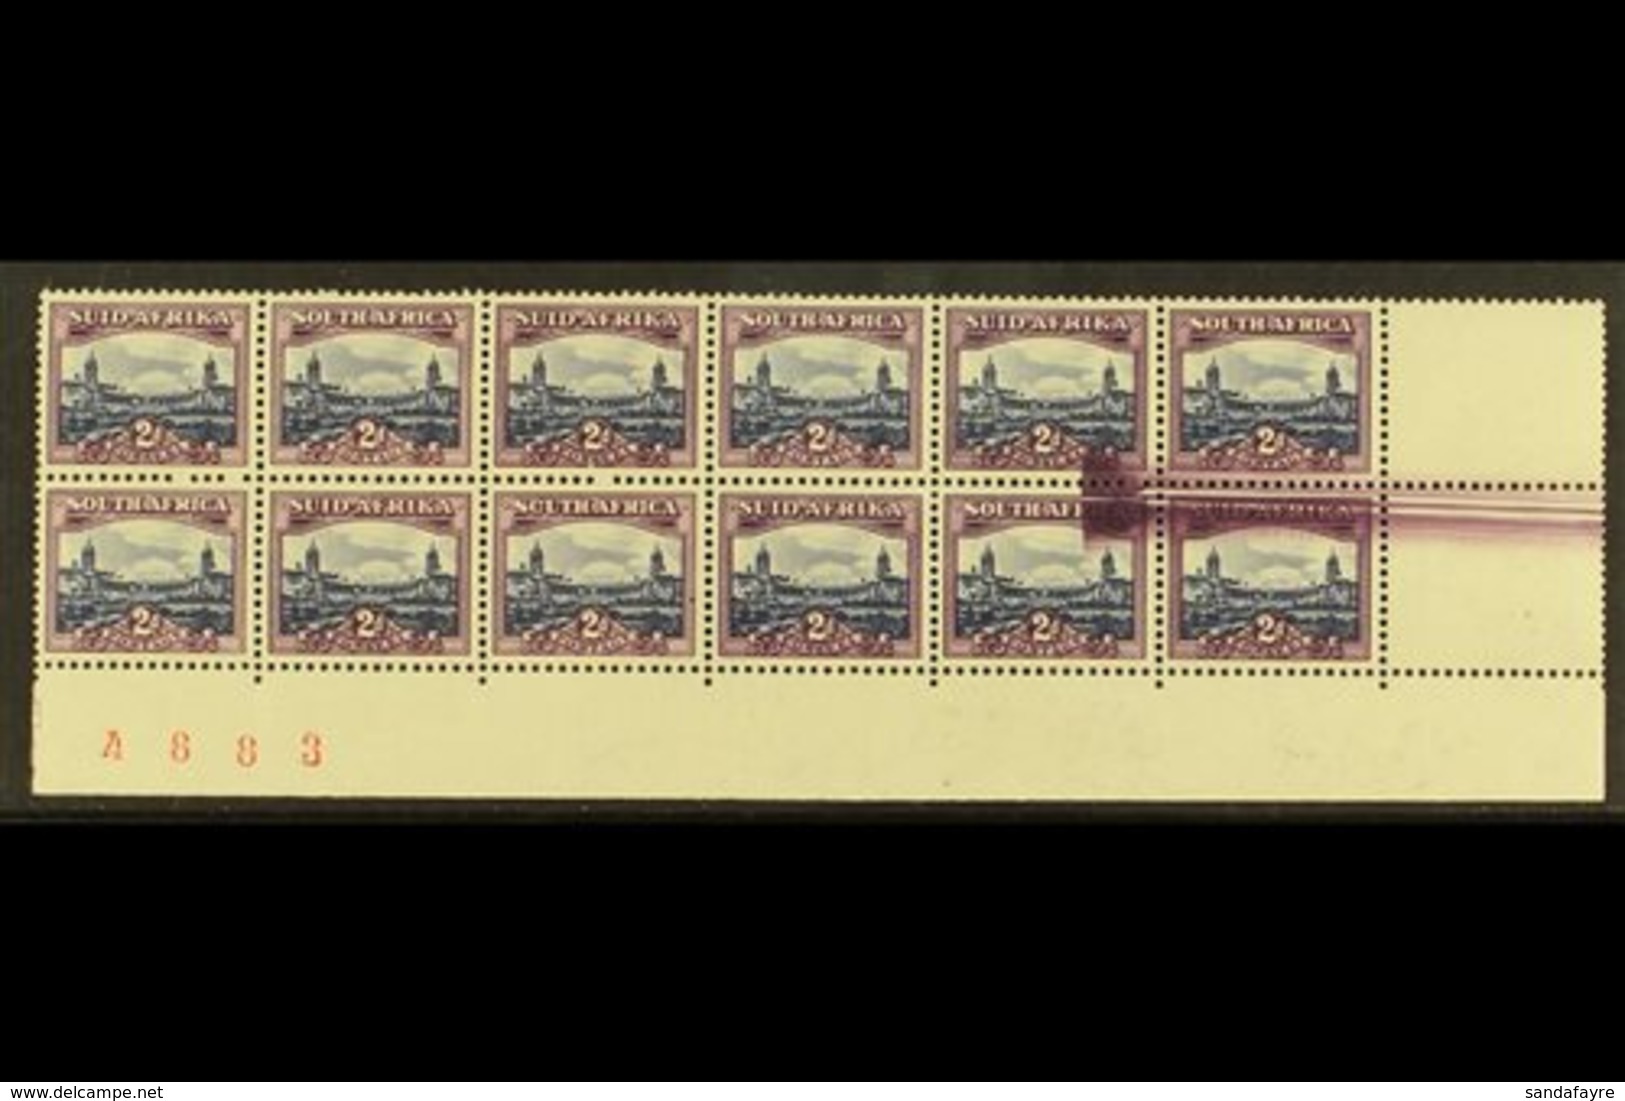 UNION VARIETY  1950-1 2d Blue & Violet, Ex Cylinder 18/30, Issue 15, Corner Marginal Block Of 12 With LARGE SCREEN FLAW  - Unclassified